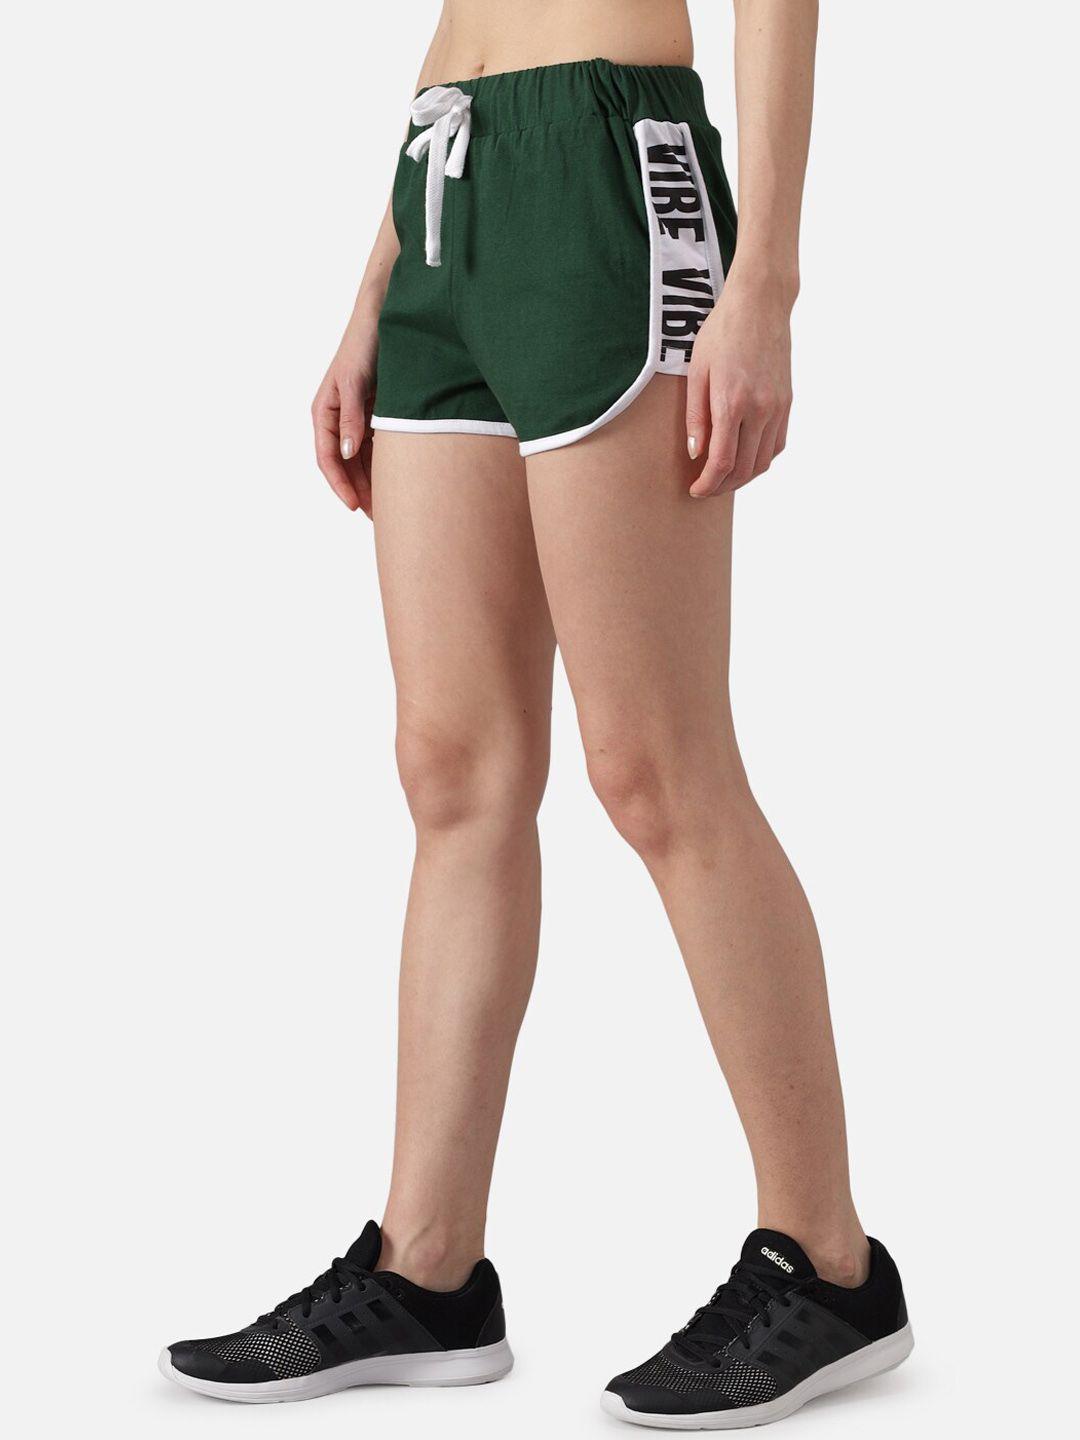 the-dry-state-women-green-solid-loose-fit-sports-shorts